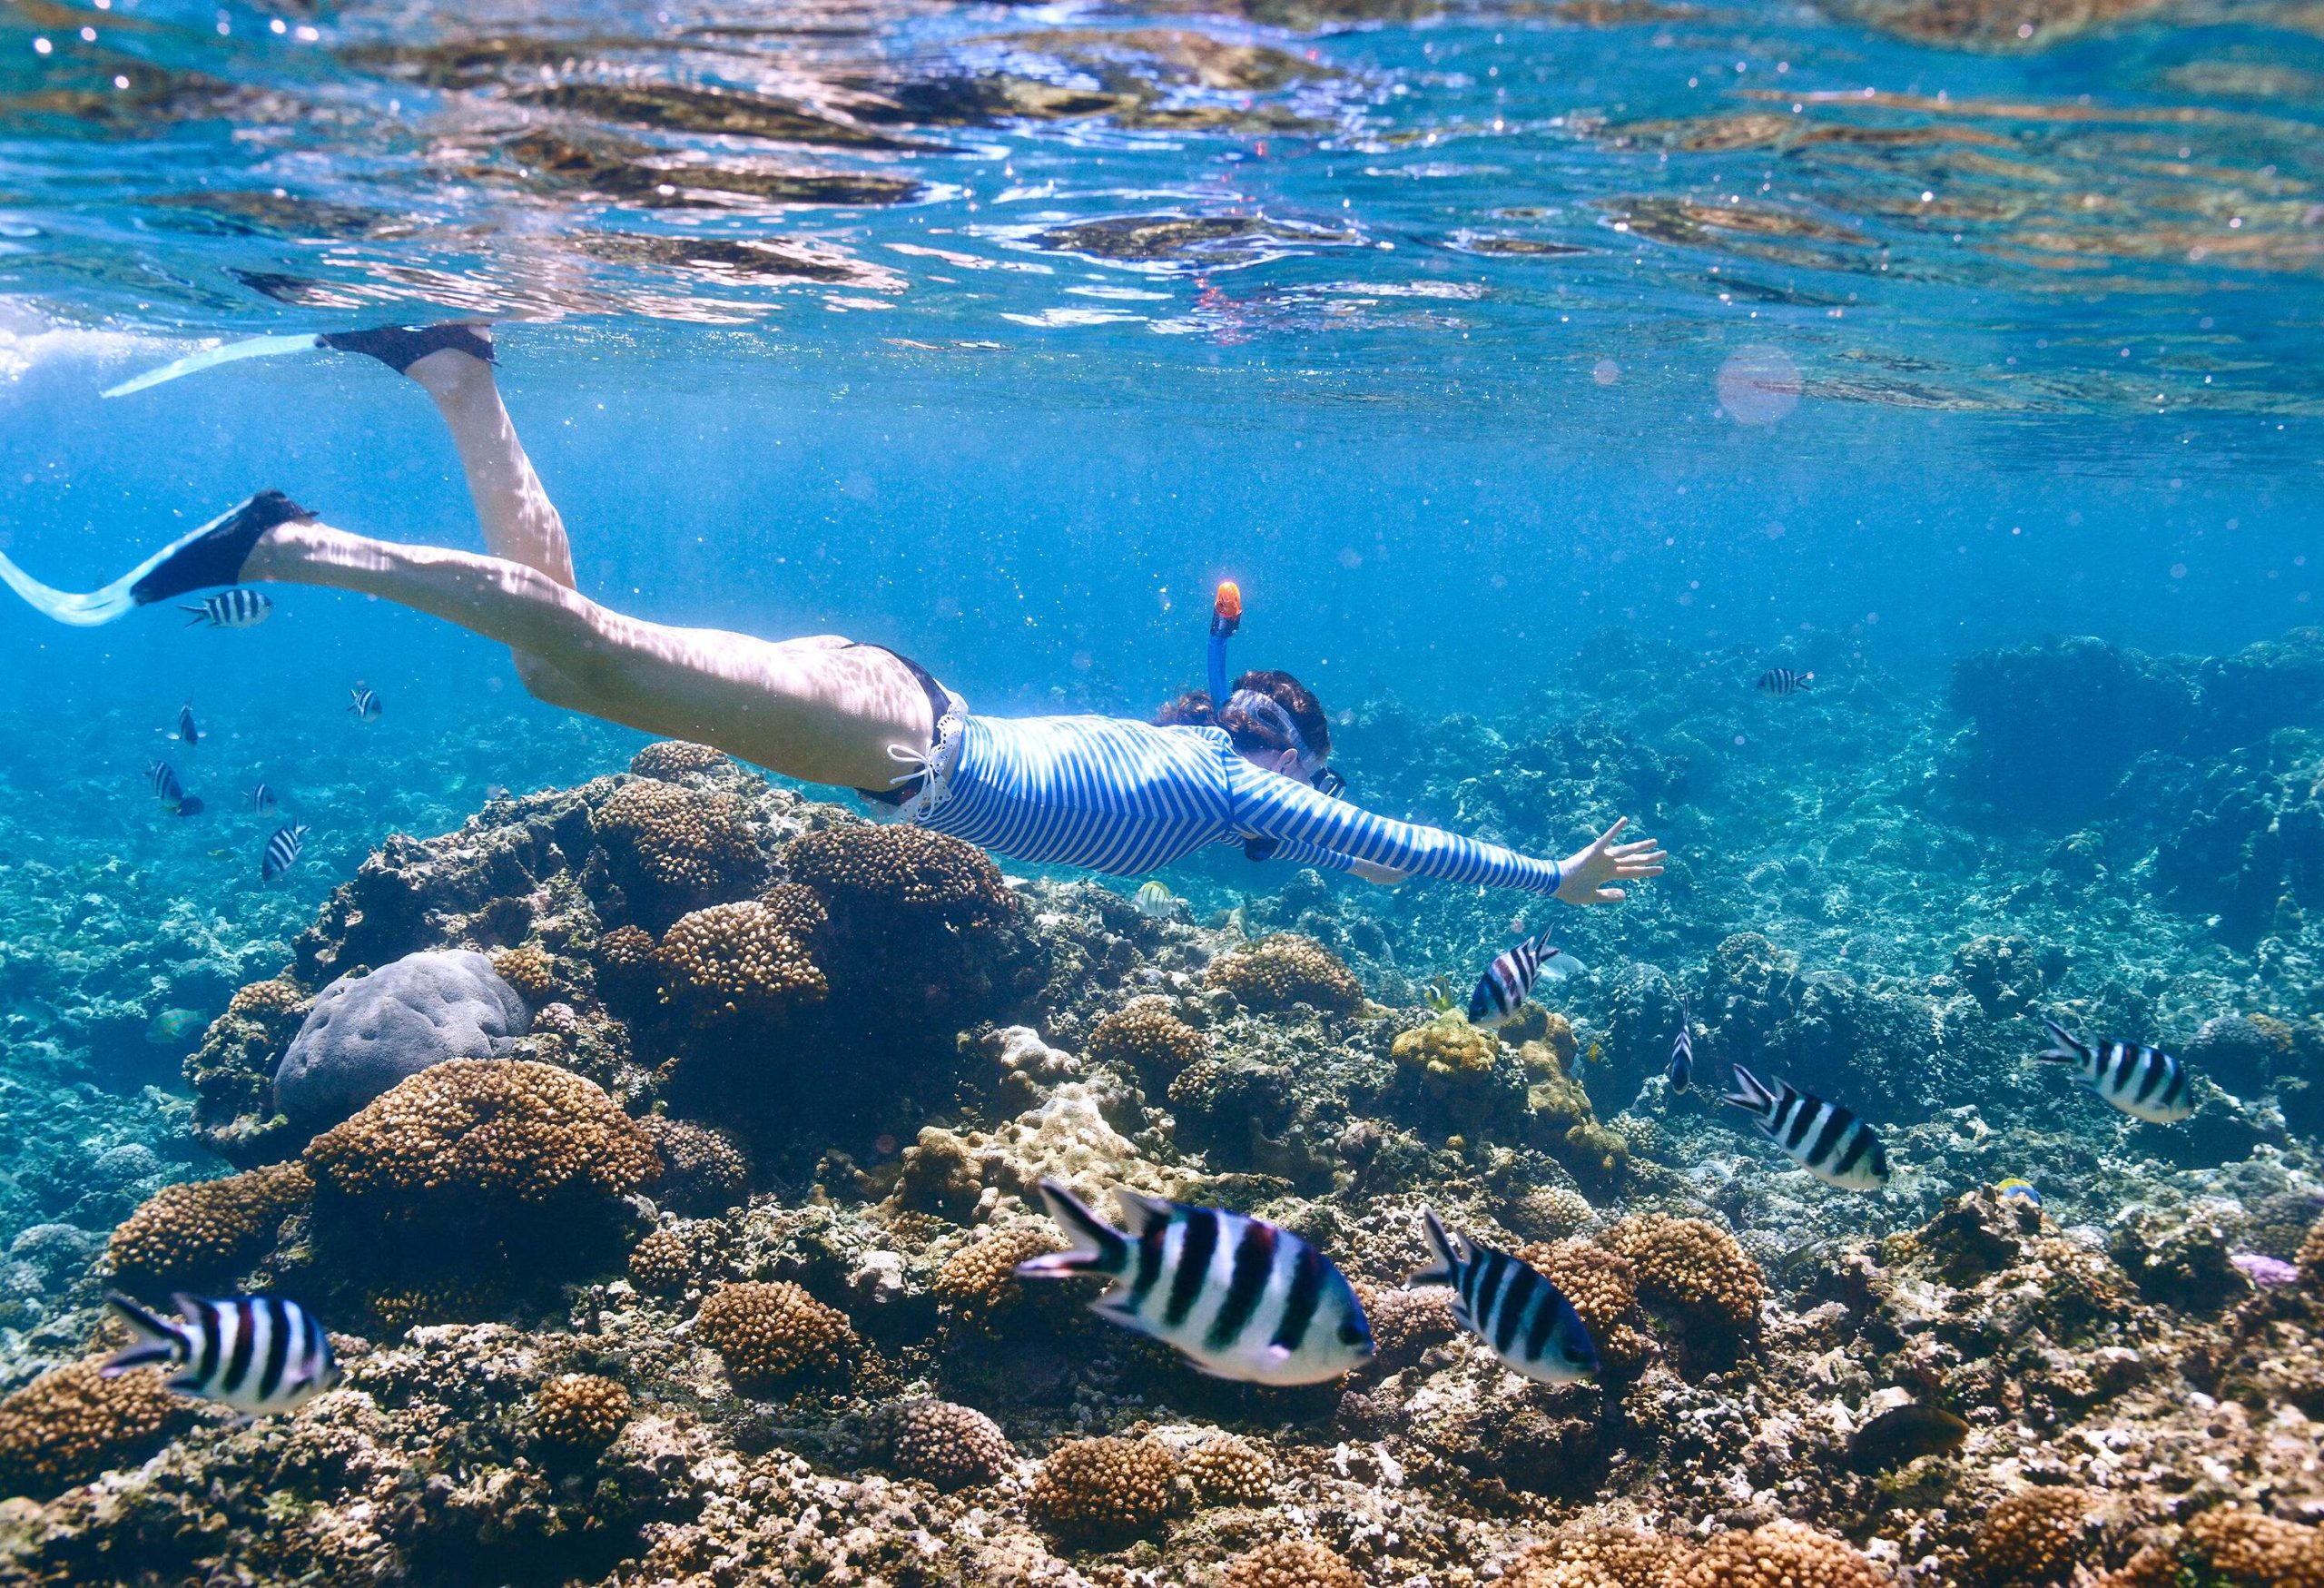 A woman snorkelling in clear water surrounded by fish close to a coral-rich seabed.